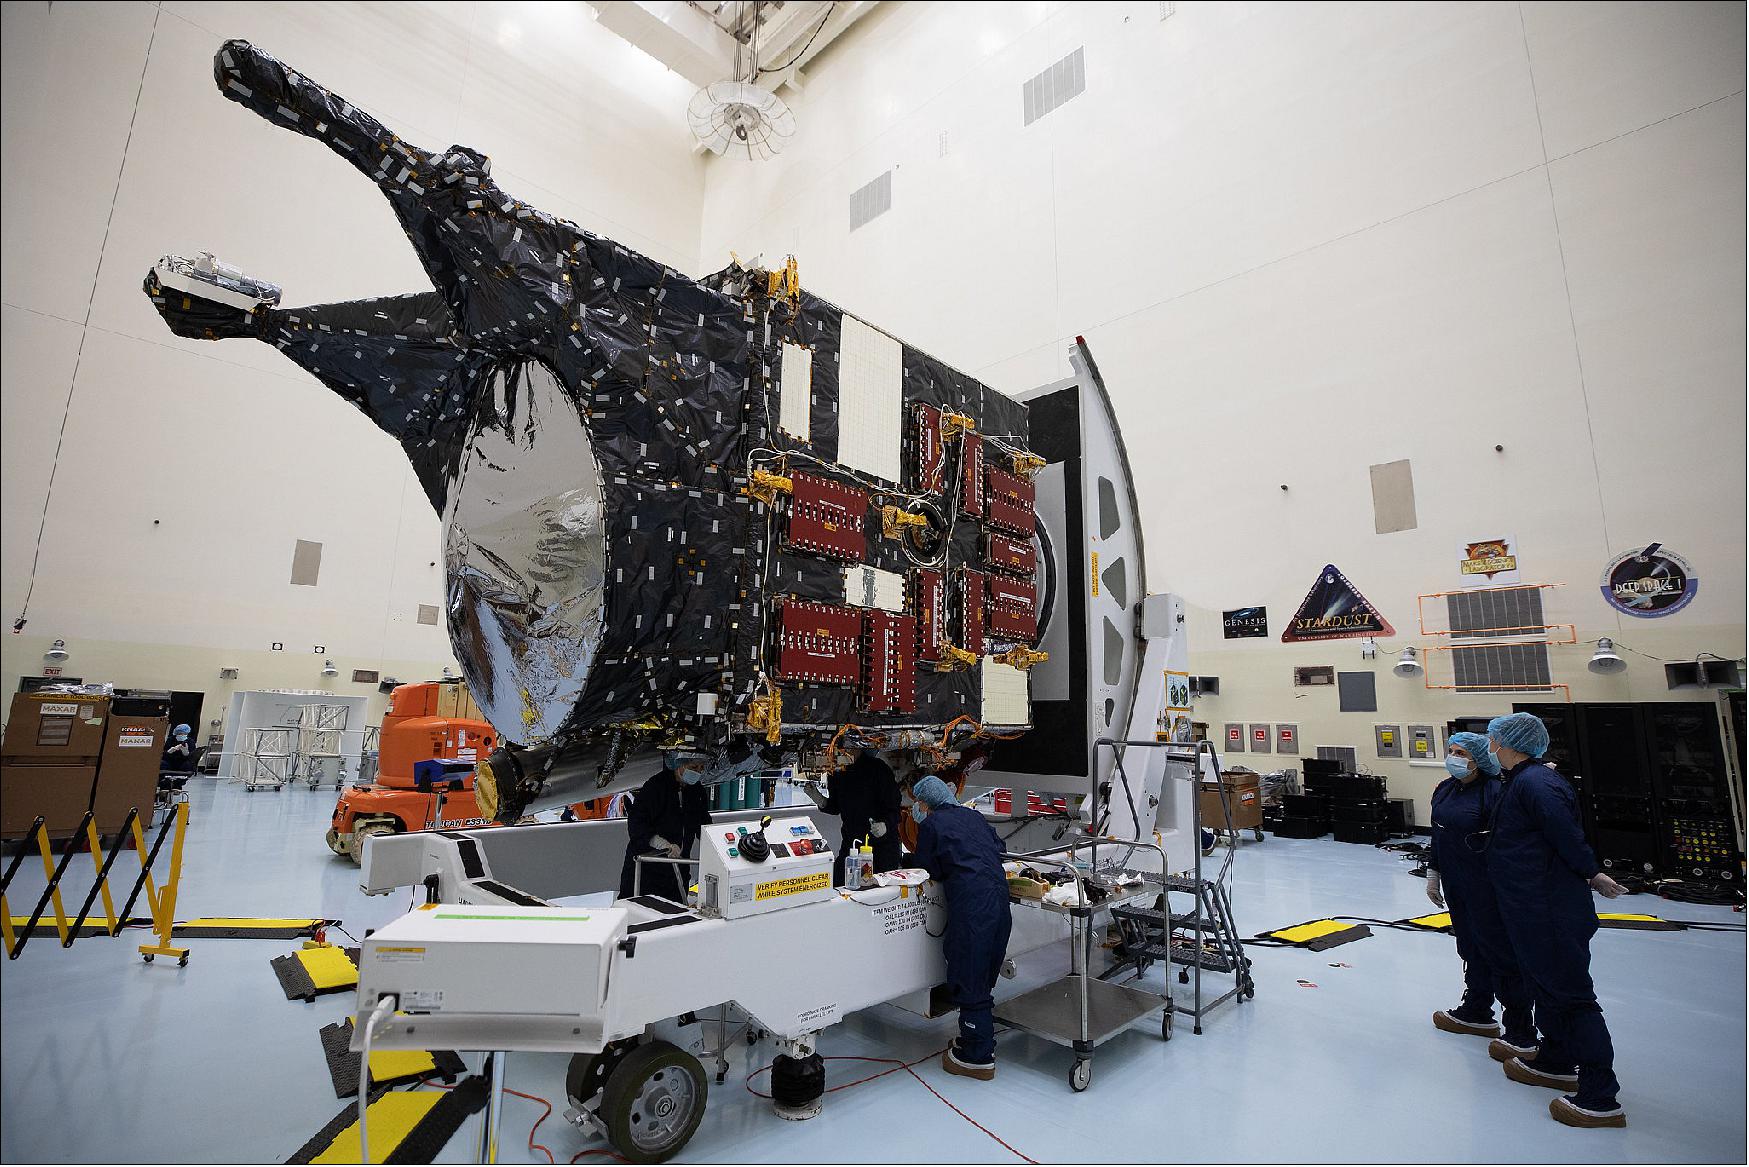 Figure 3: The Psyche spacecraft sits in the Payload Hazardous Servicing Facility at NASA’s Kennedy Space Center in Florida after traveling across the country from a clean room at the agency’s Jet Propulsion Laboratory in Southern California (image credit: NASA/Isaac Watson)